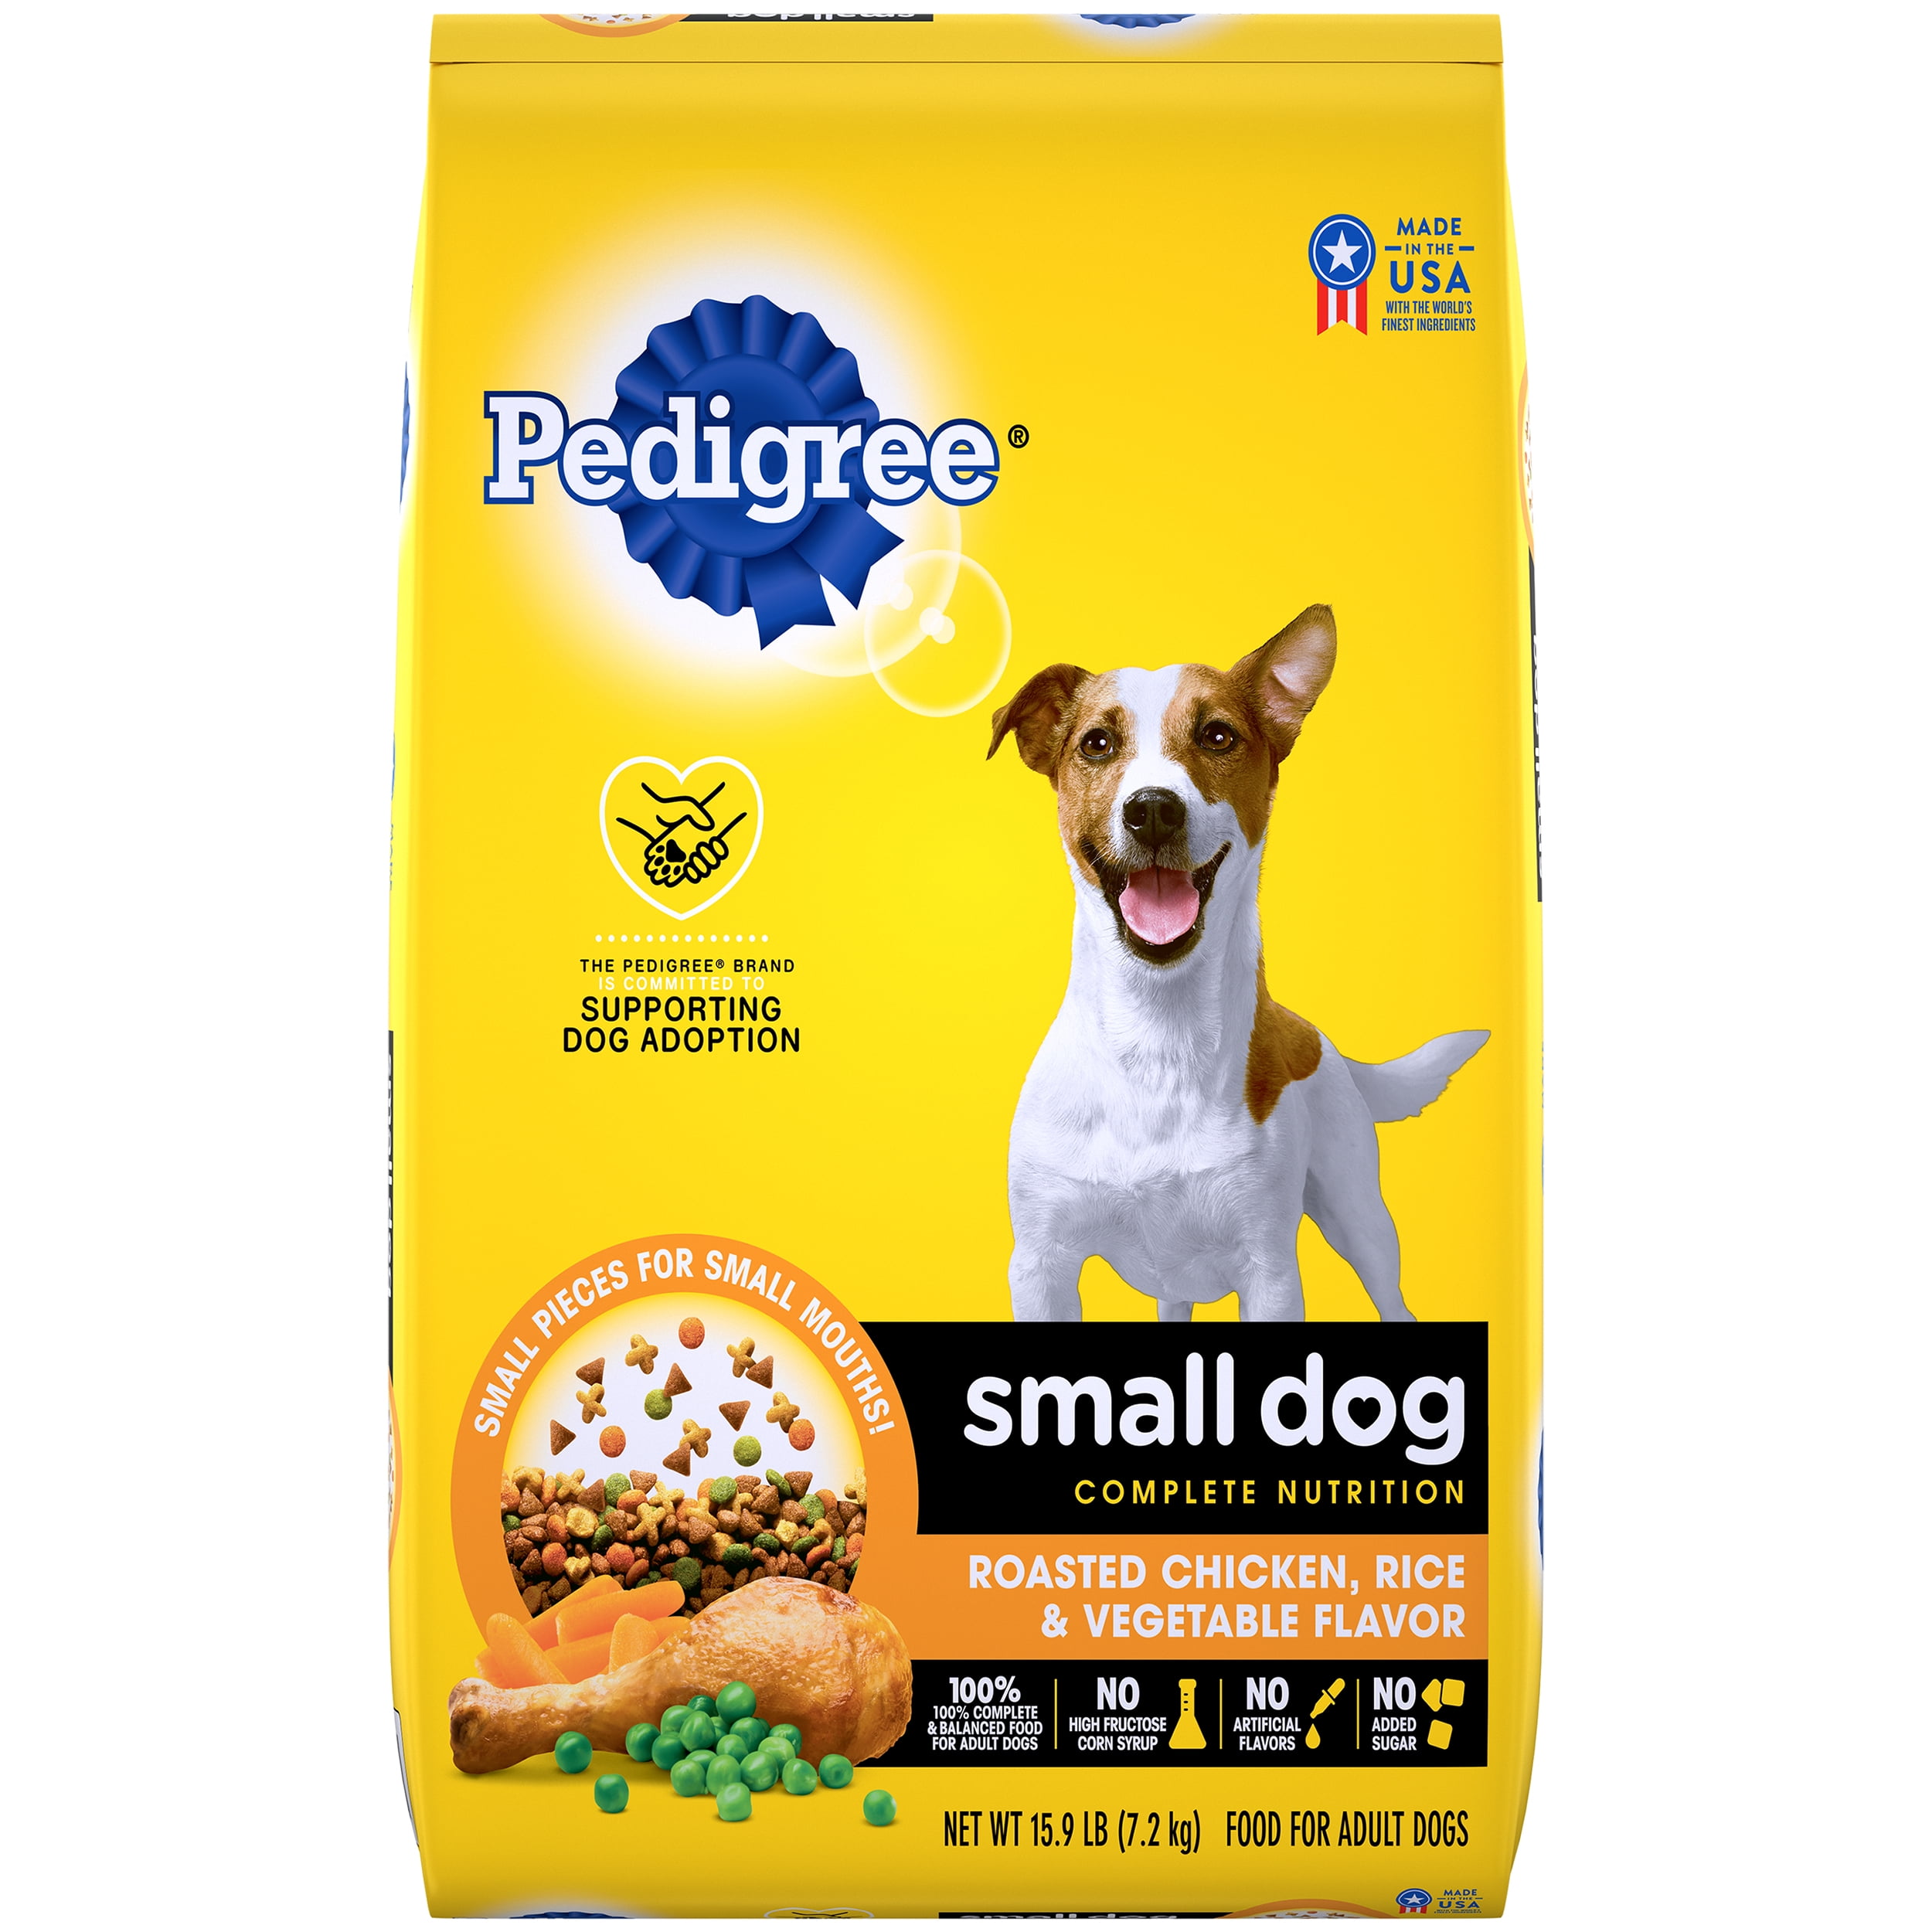 the best food for small dogs